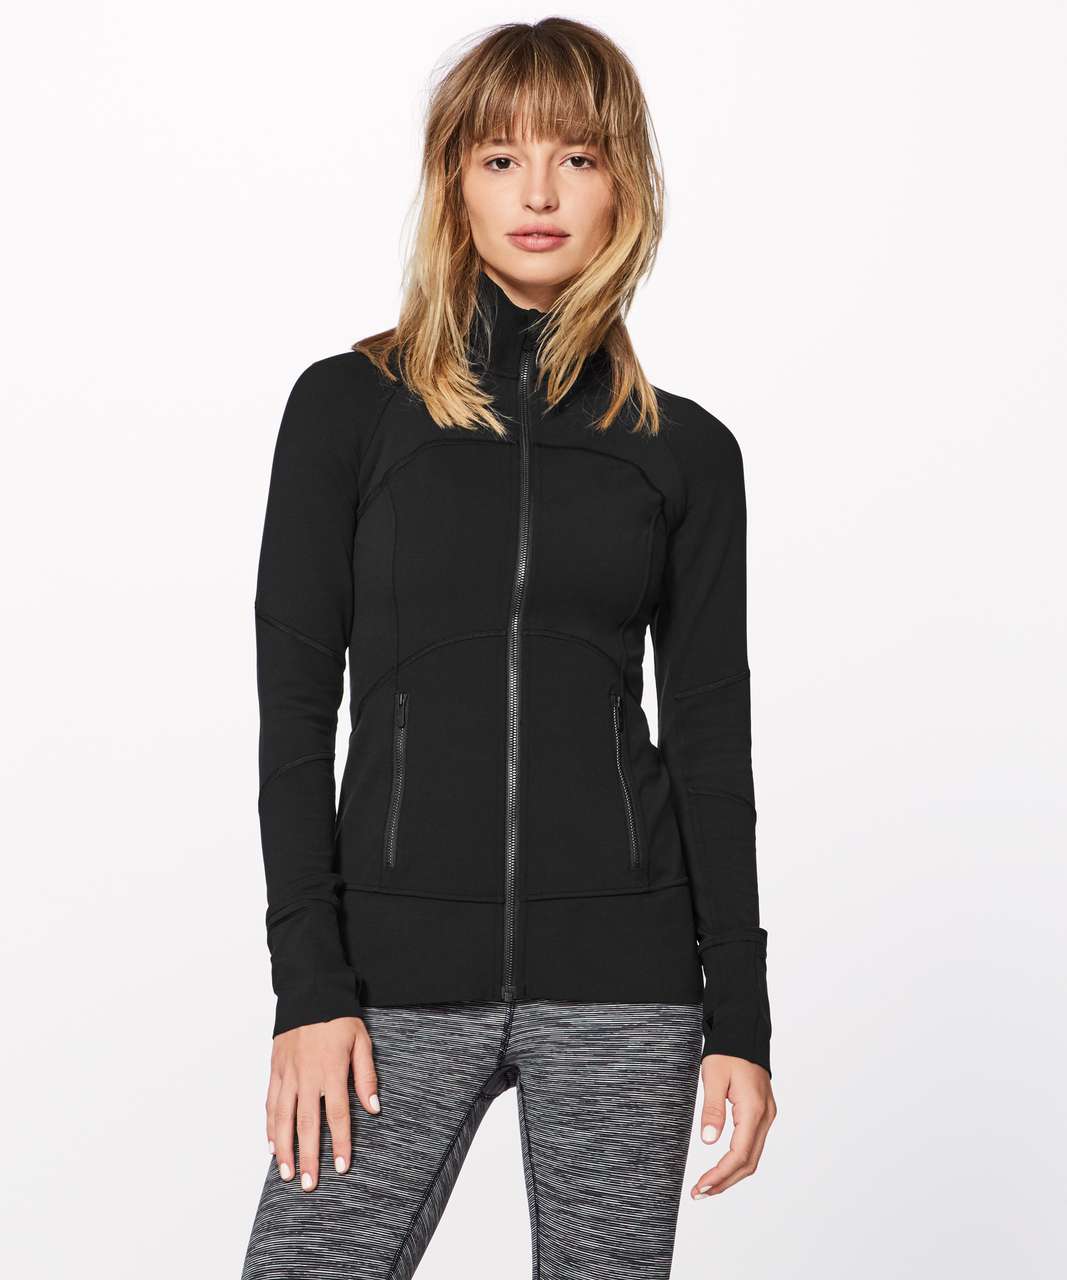 I got this amazing Lululemon contour jacket dupe from Dunnes - it's the  'best ever' and €88 cheaper